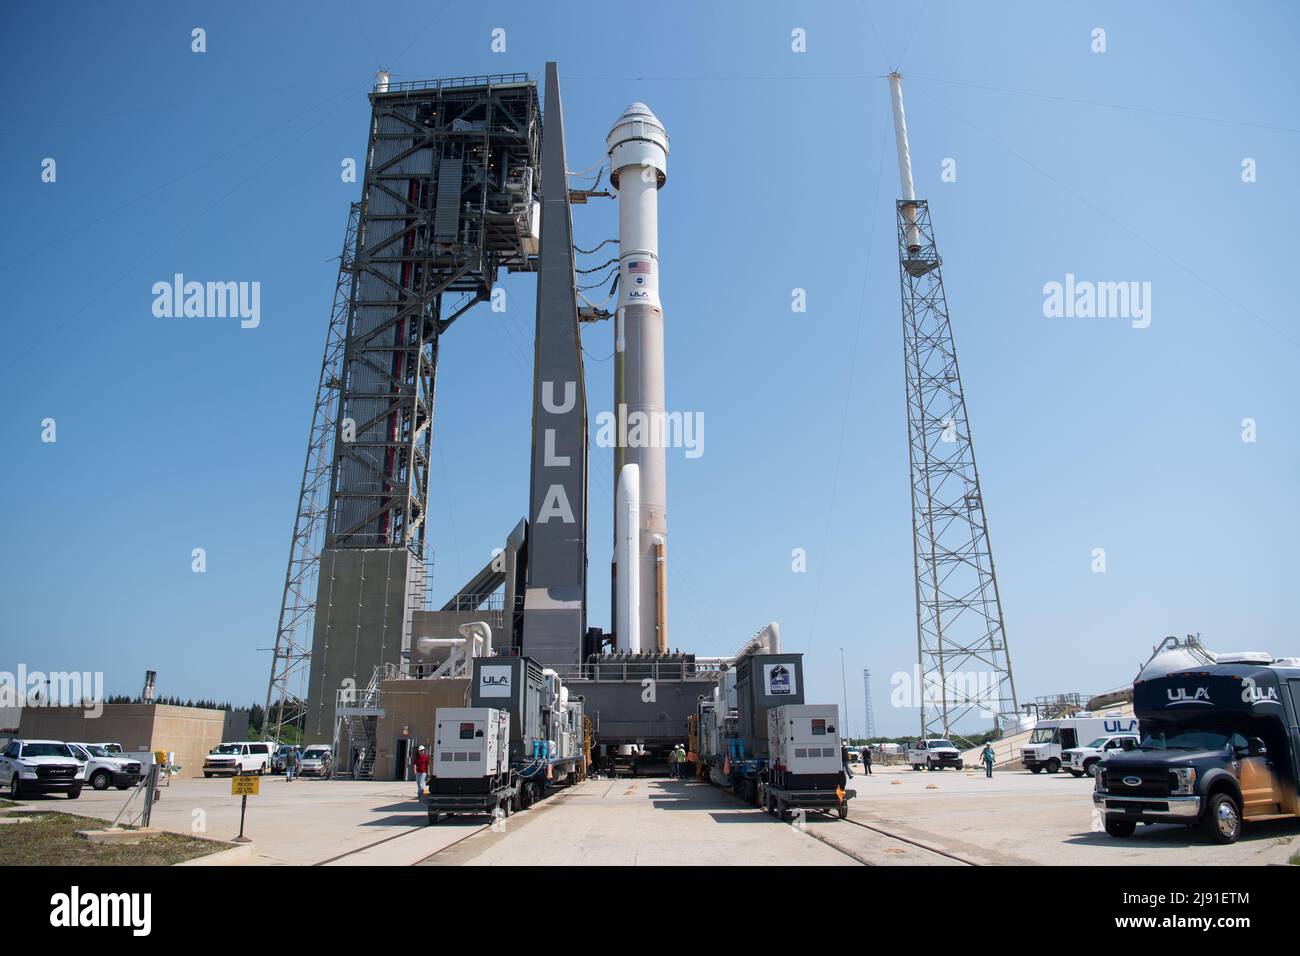 Cape Canaveral, United States of America. 18 May, 2022. The United Launch Alliance Atlas V rocket carrying the Boeing CST-100 Starliner spacecraft aboard after rolling out from the Vertical Integration Facility at Space Launch Complex 41 in preparation for launch, May 18, 2022 in Cape Canaveral, Florida. The Orbital Flight Test-2 will be second un-crewed flight test and will dock to the International Space Station and is expected to lift off May 19th. Credit: Joel Kowsky/NASA/Alamy Live News Stock Photo